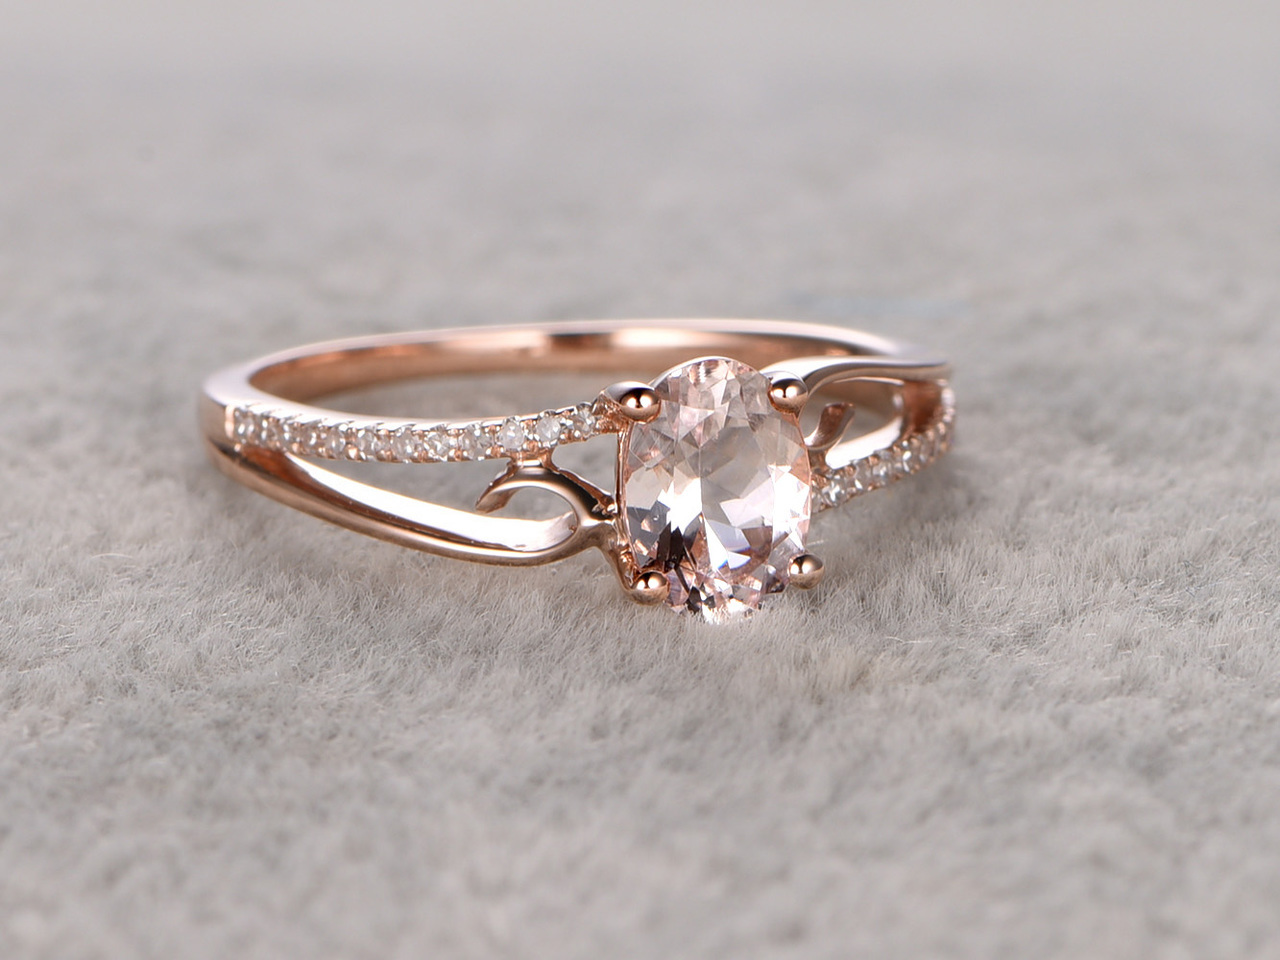 What should you look for when buying wedding rings?